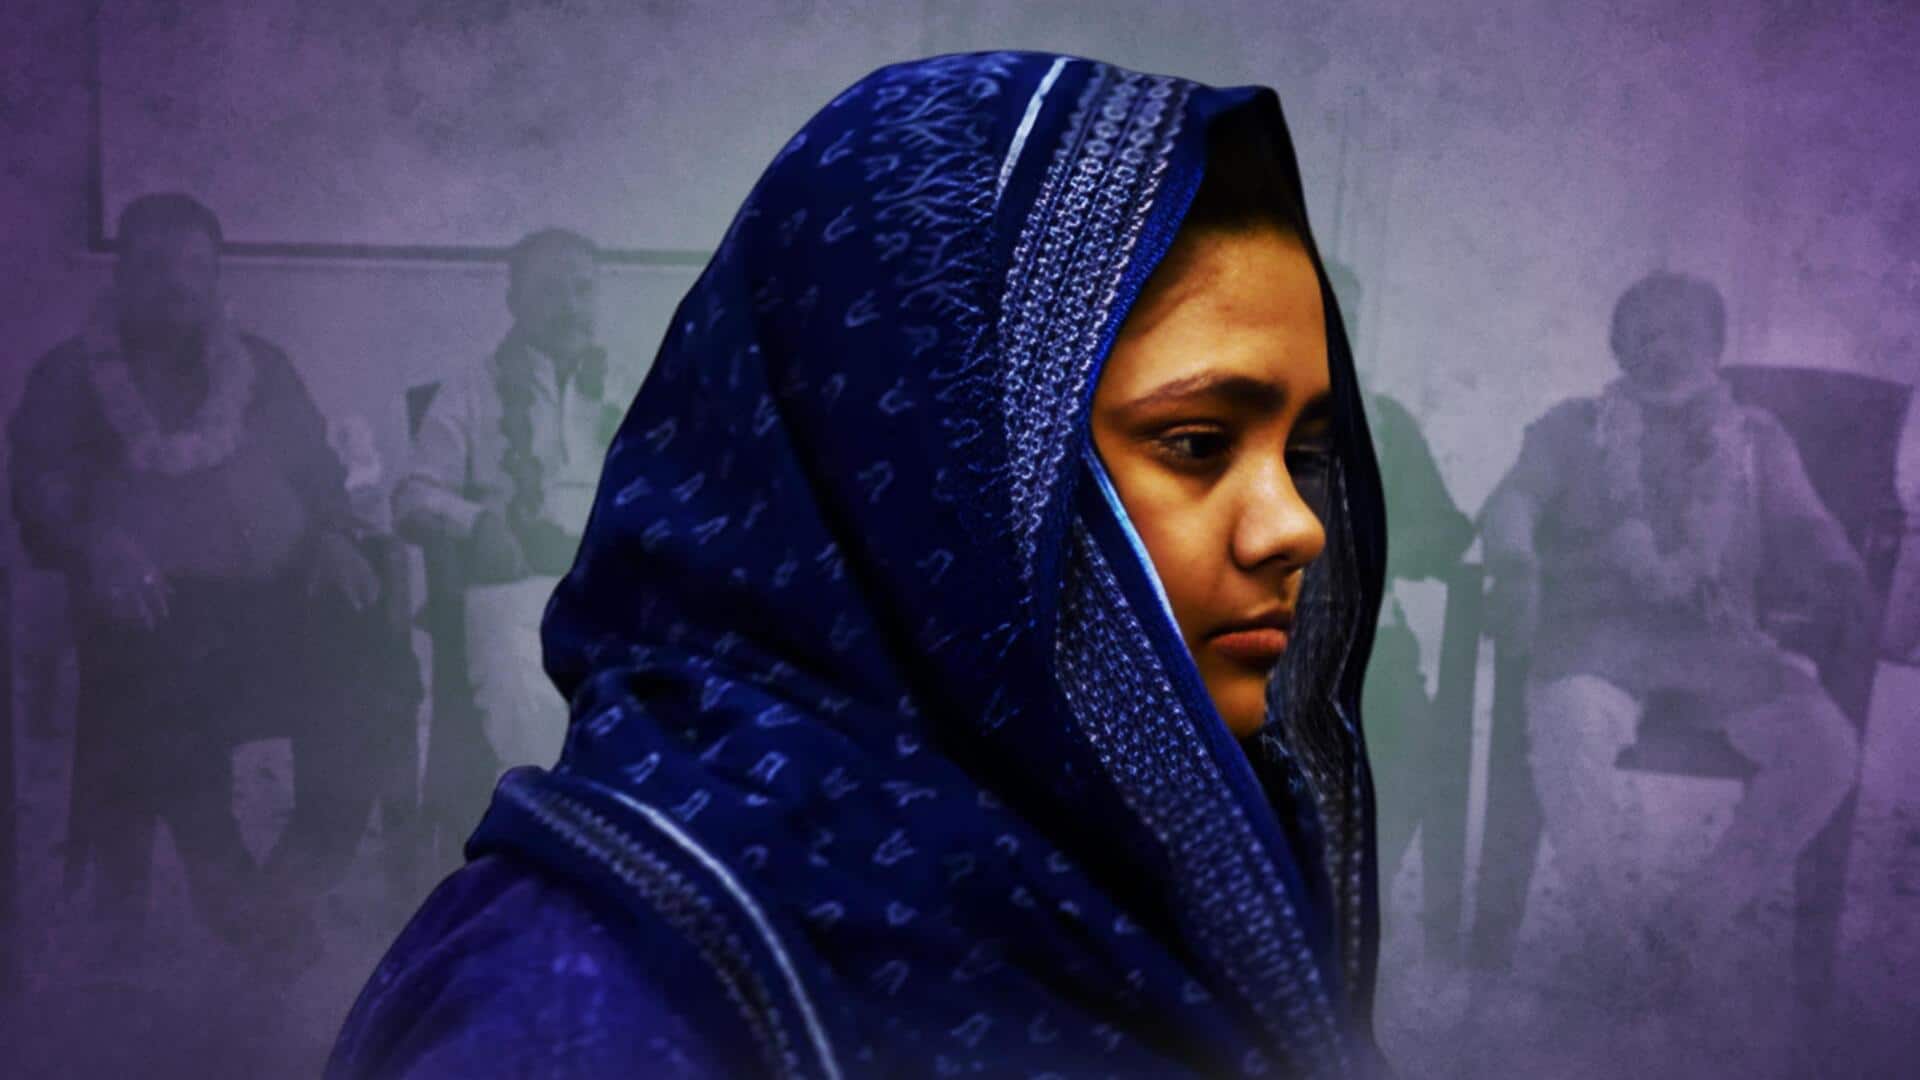 Bilkis Bano case: Rape convicts not home, says report